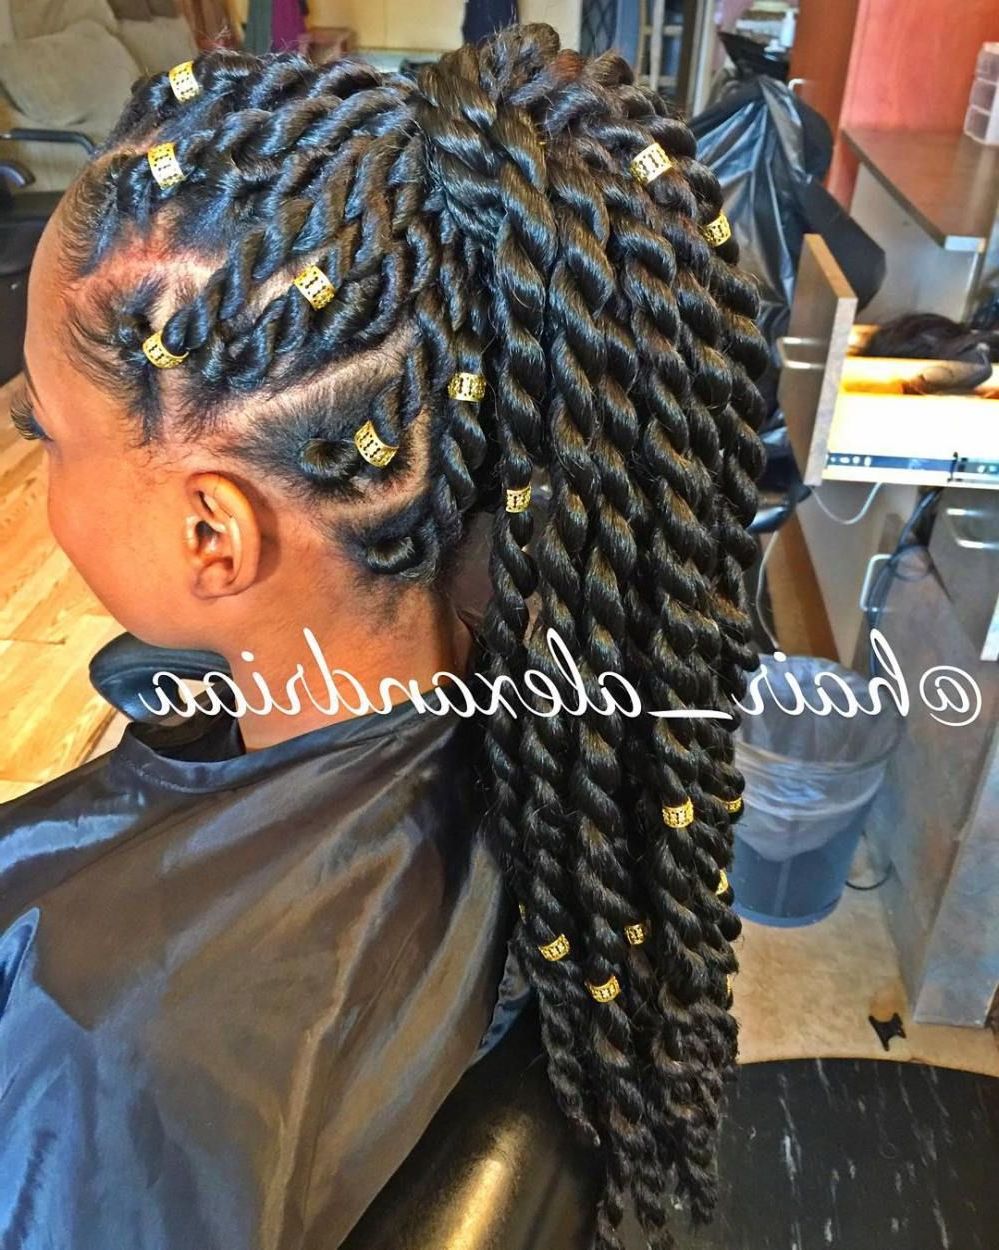 60 Easy And Showy Protective Hairstyles For Natural Hair In For Most Recently Released Long Braid Hairstyles With Golden Beads (View 9 of 20)